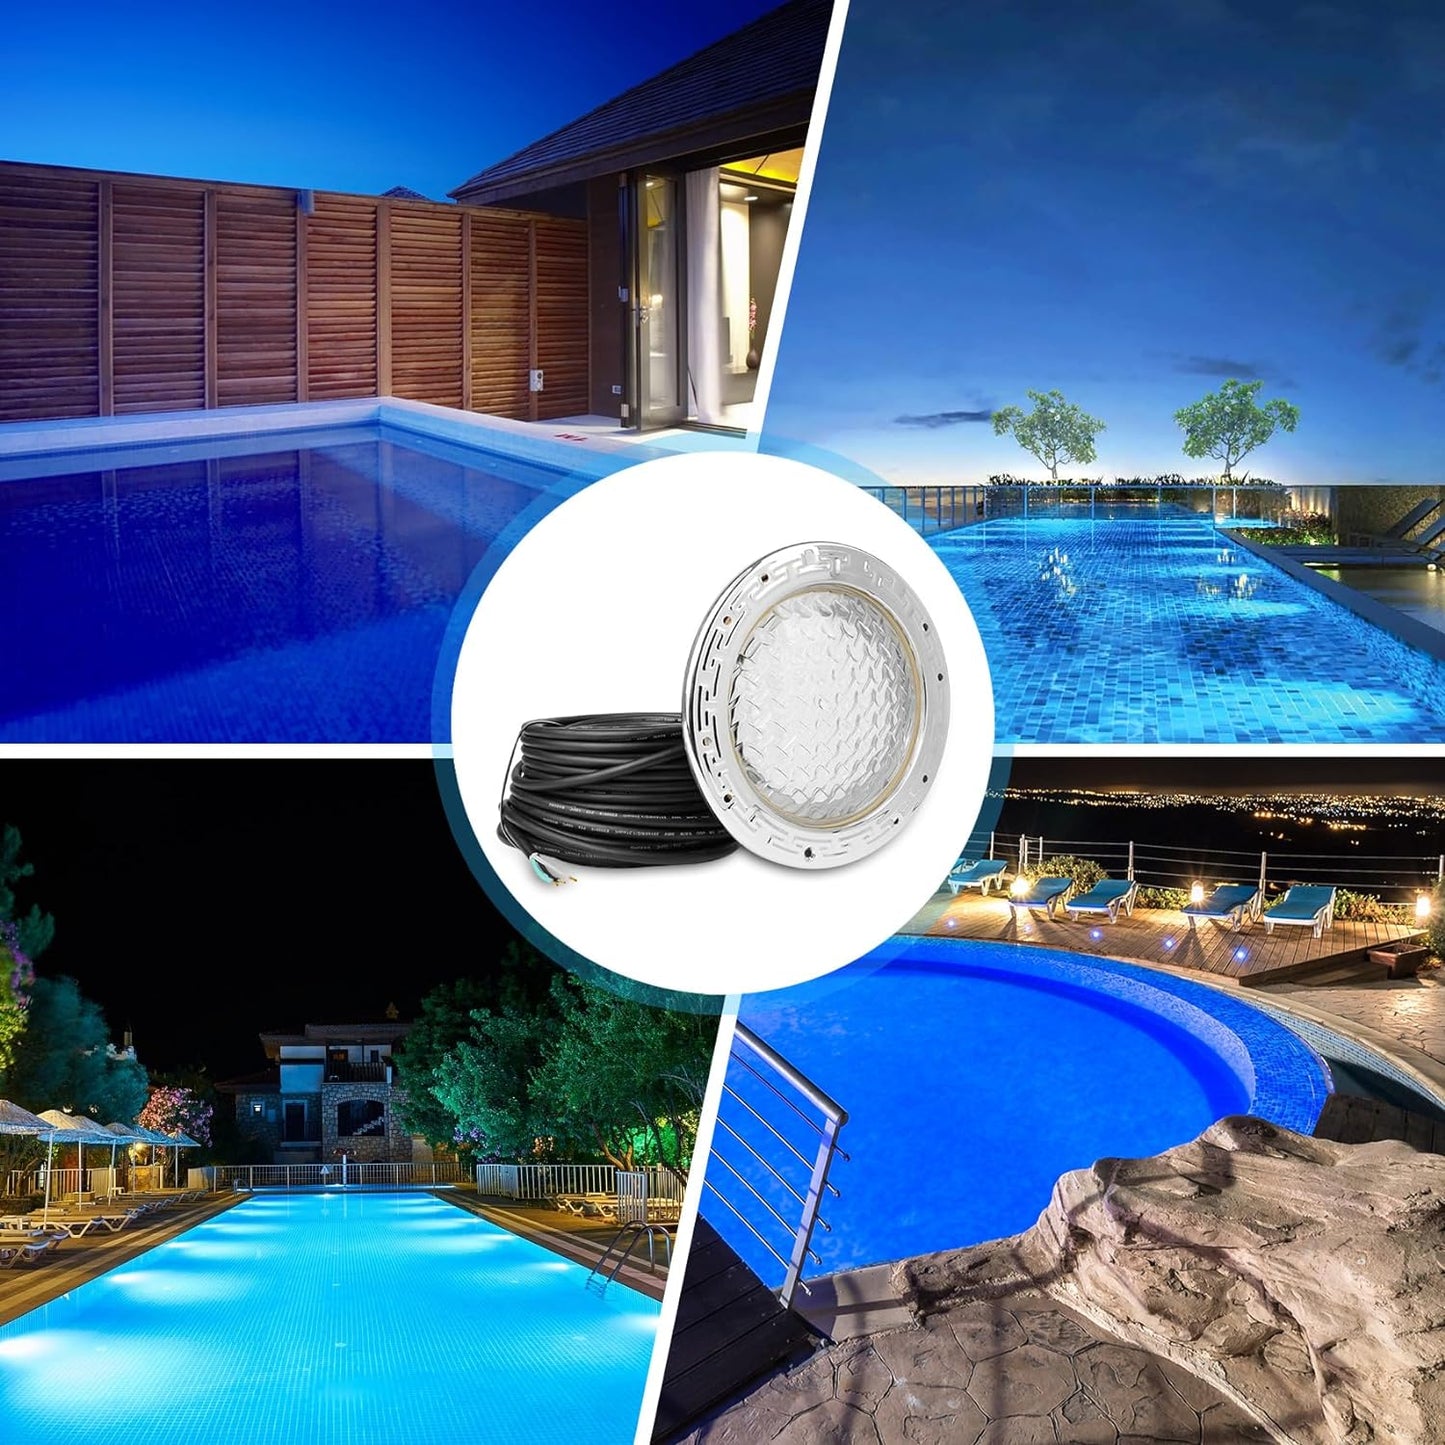 LED RGBW 10 Inch 120V AC Pool Lights for Inground Pool, Led Lights for Inground Pool with 100 Foot Cord for 10 inch Wet Niche, UL Listed with Remote Controls